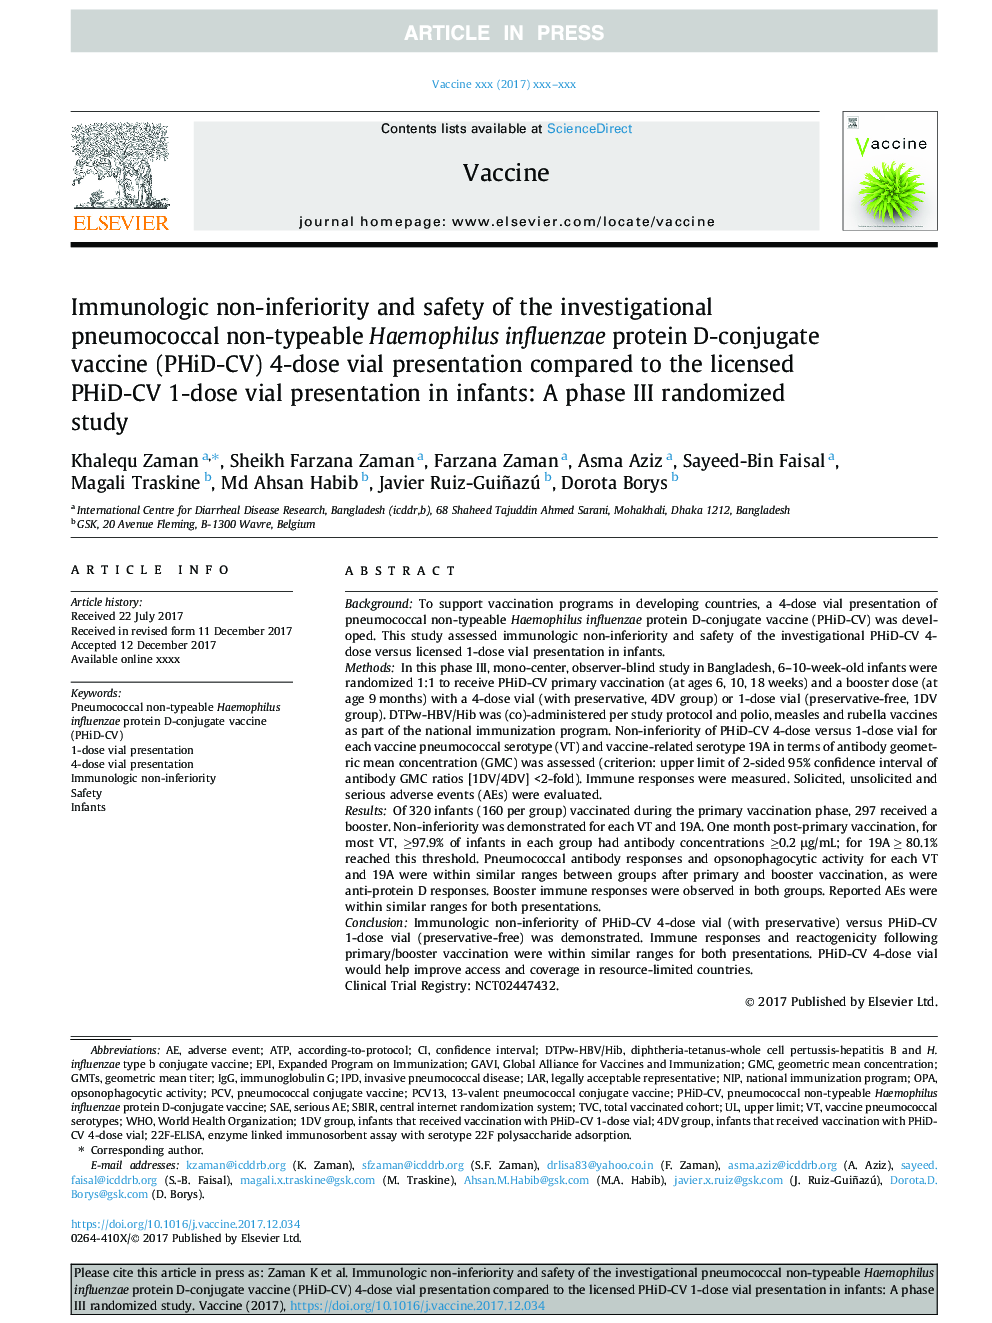 Immunologic non-inferiority and safety of the investigational pneumococcal non-typeable Haemophilus influenzae protein D-conjugate vaccine (PHiD-CV) 4-dose vial presentation compared to the licensed PHiD-CV 1-dose vial presentation in infants: A phase III